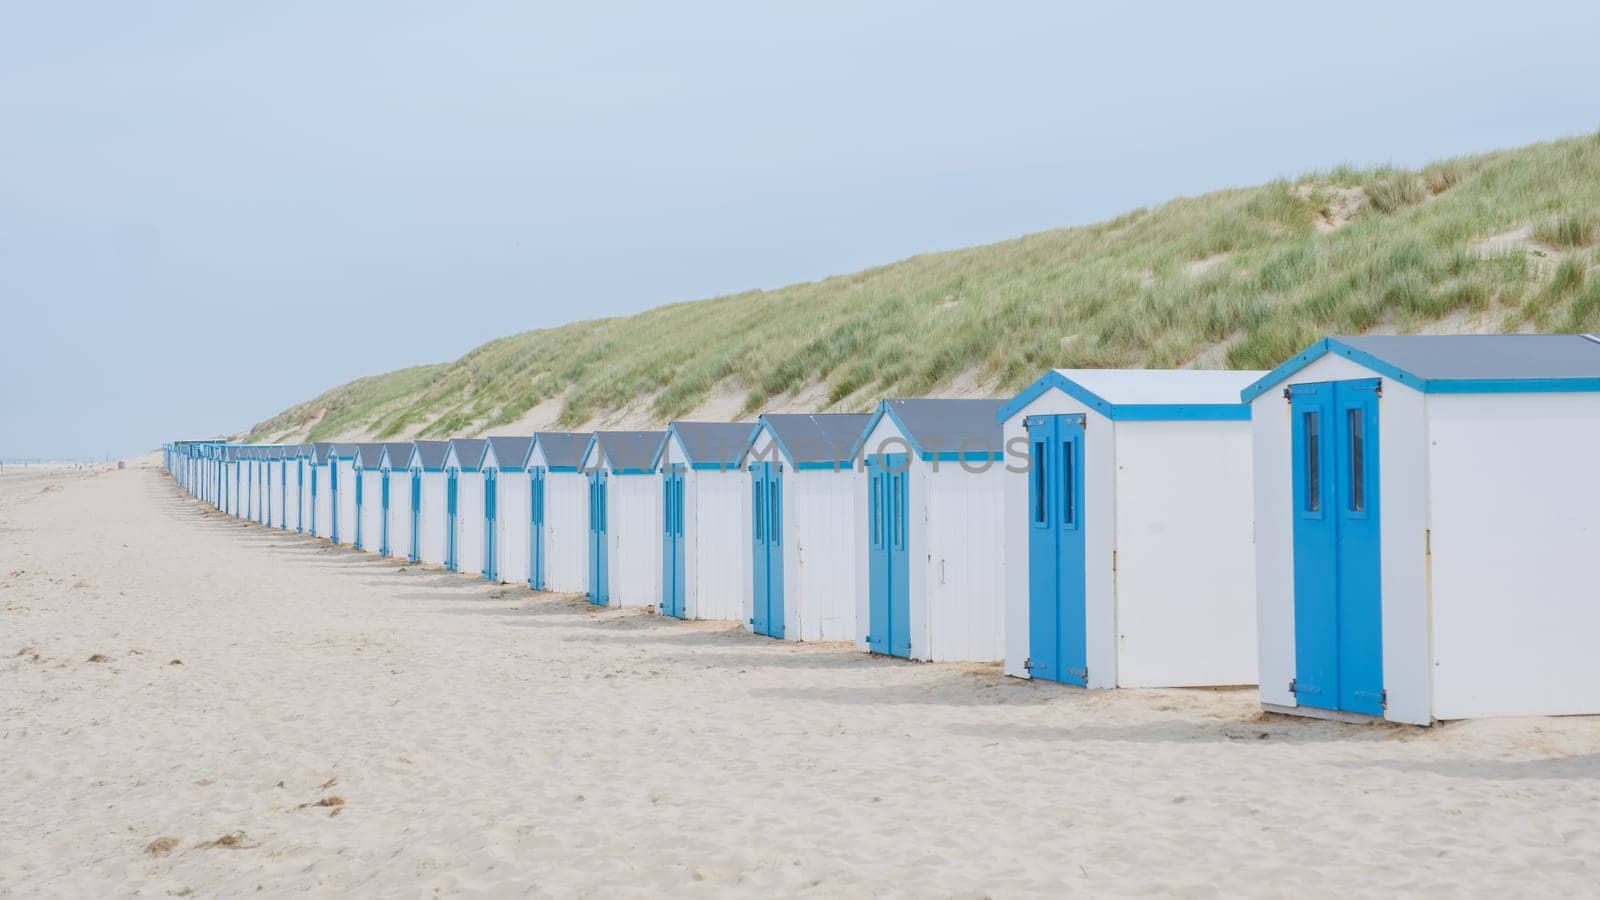 A picturesque row of blue and white beach huts stand elegantly on the sandy shores of Texel, Netherlands, under the clear blue sky.